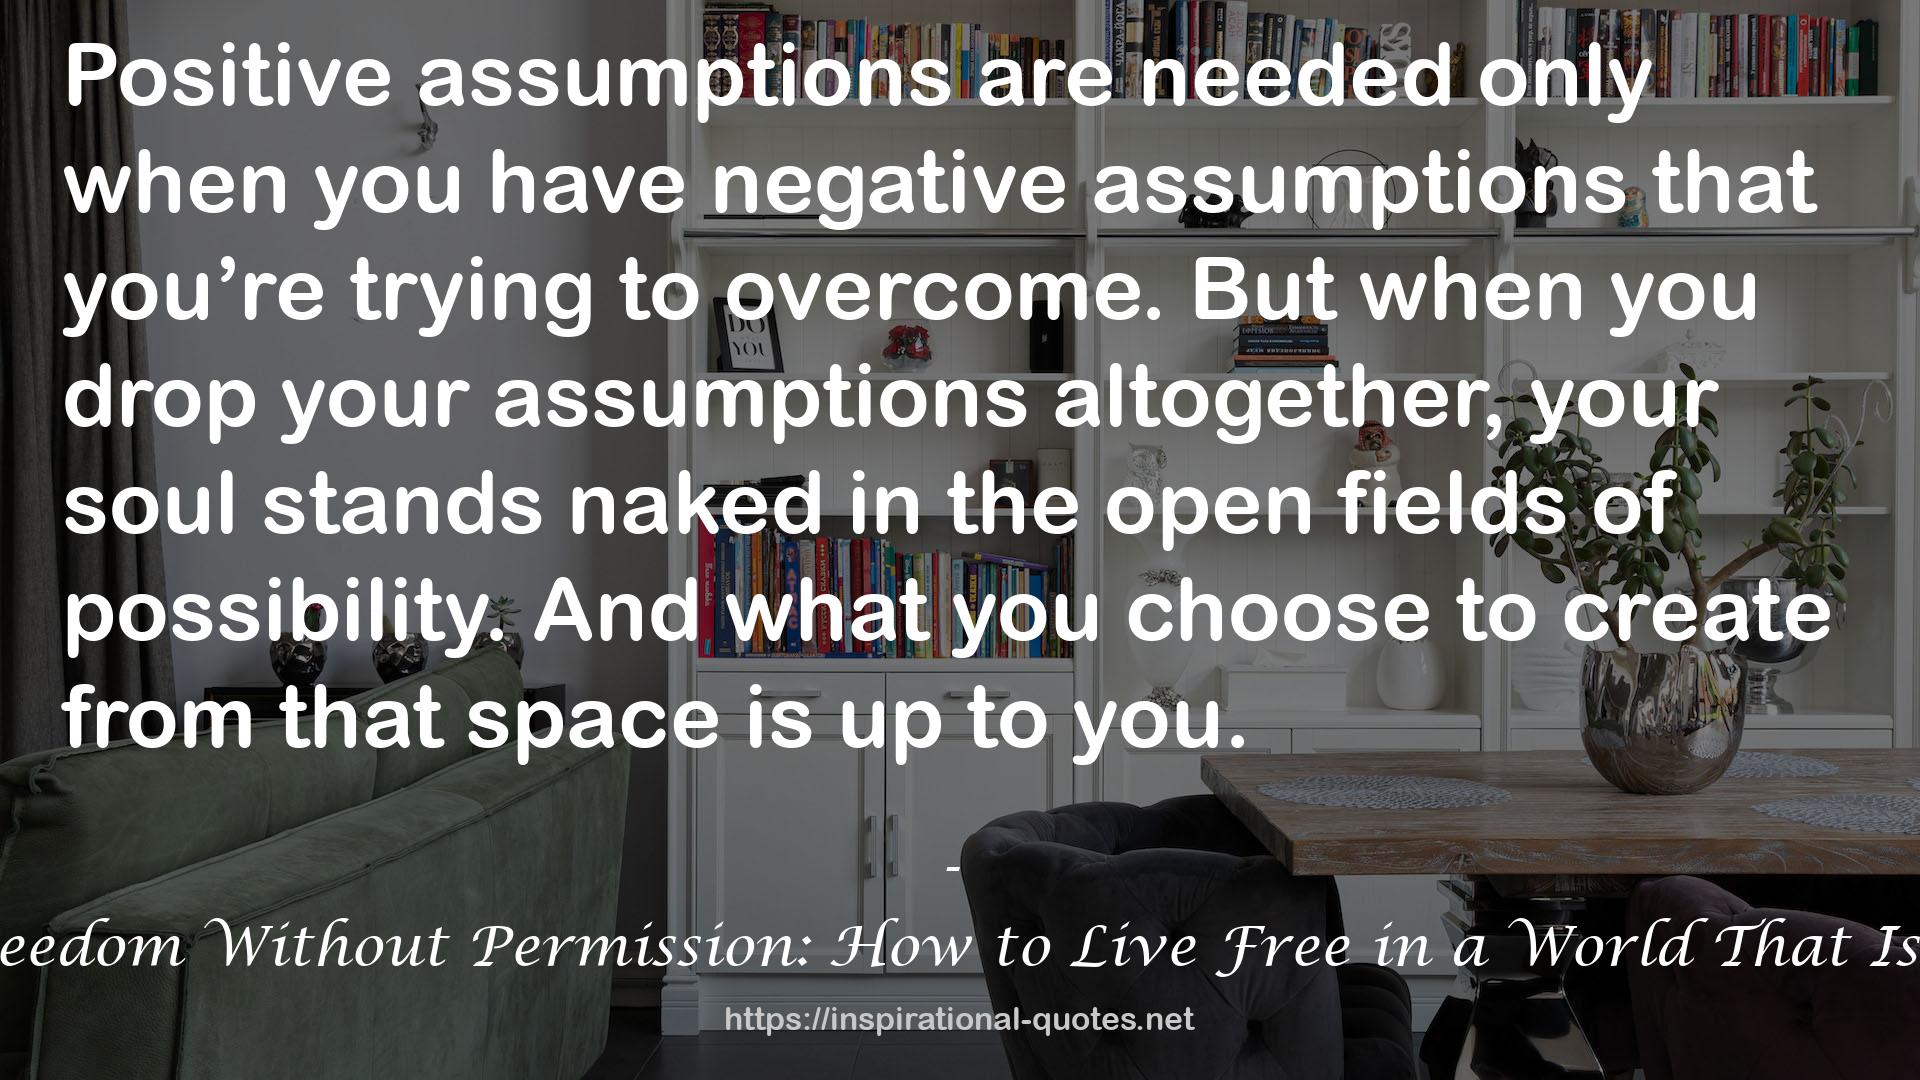 Freedom Without Permission: How to Live Free in a World That Isn't QUOTES